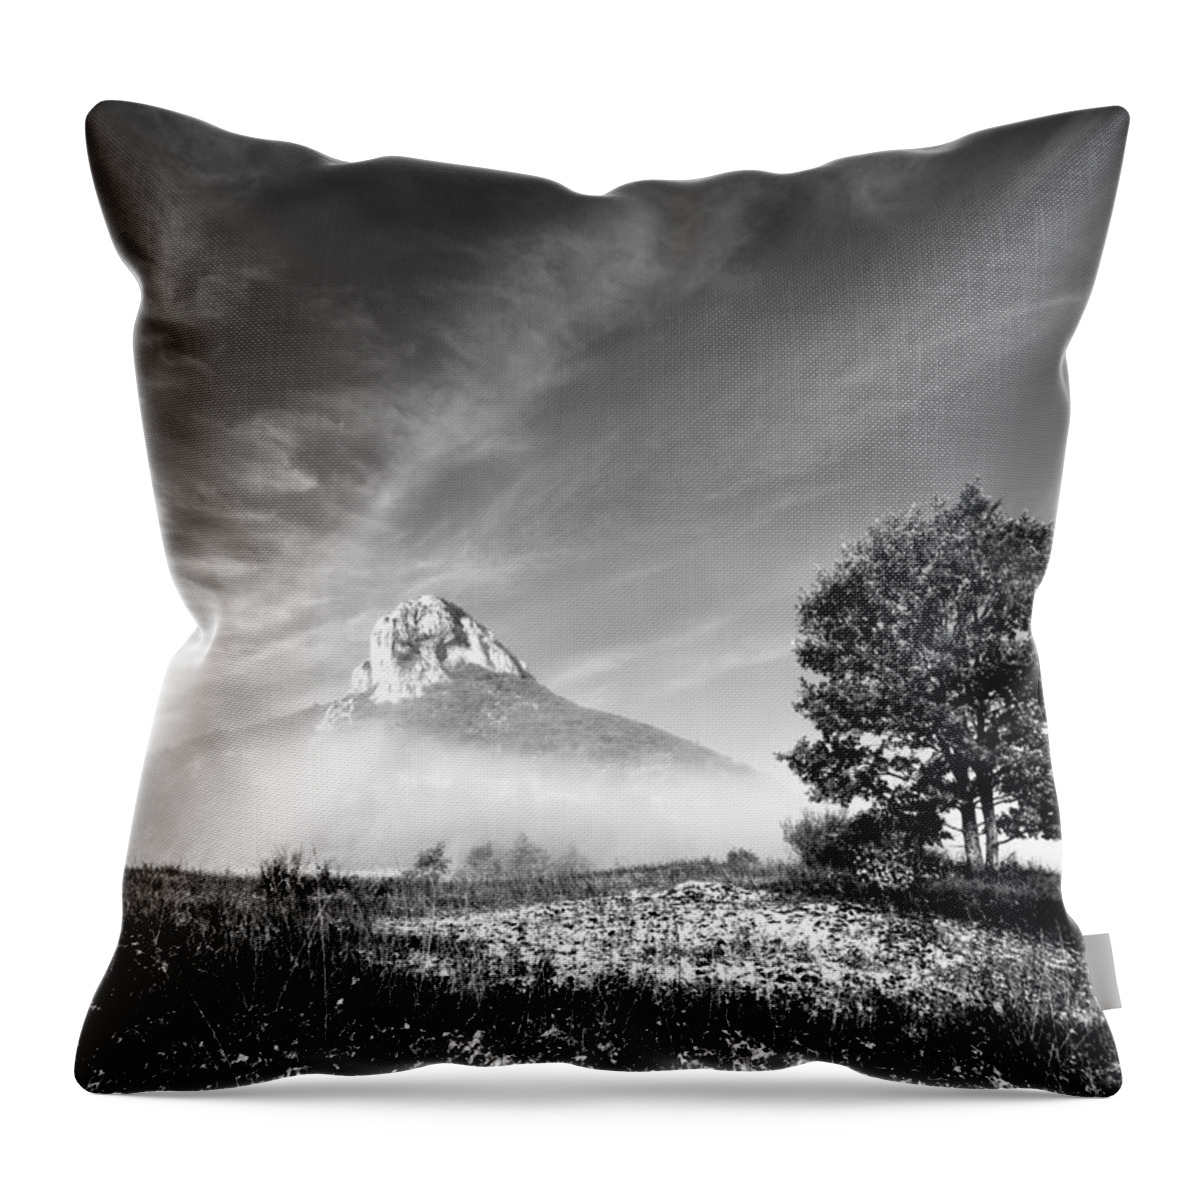 Landscape Throw Pillow featuring the photograph Mountain Zir by Davorin Mance